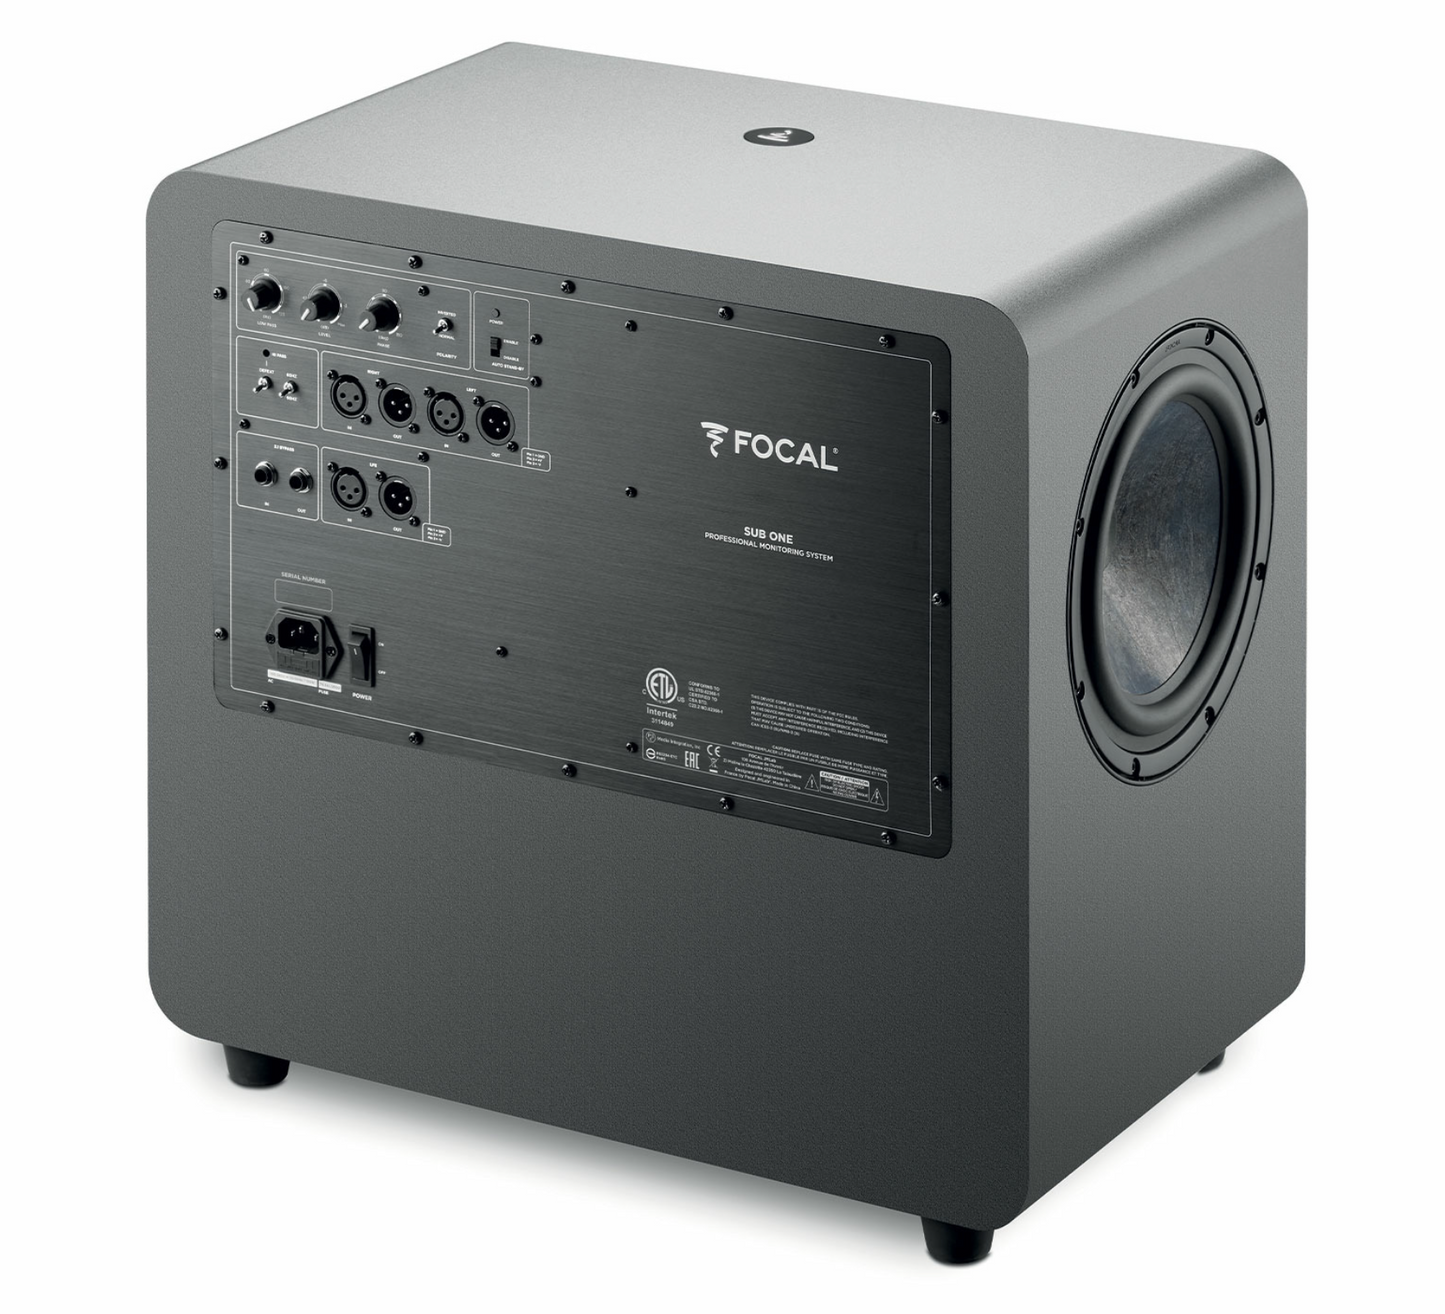 Focal Sub One Active Studio Subwoofer, image shows inputs